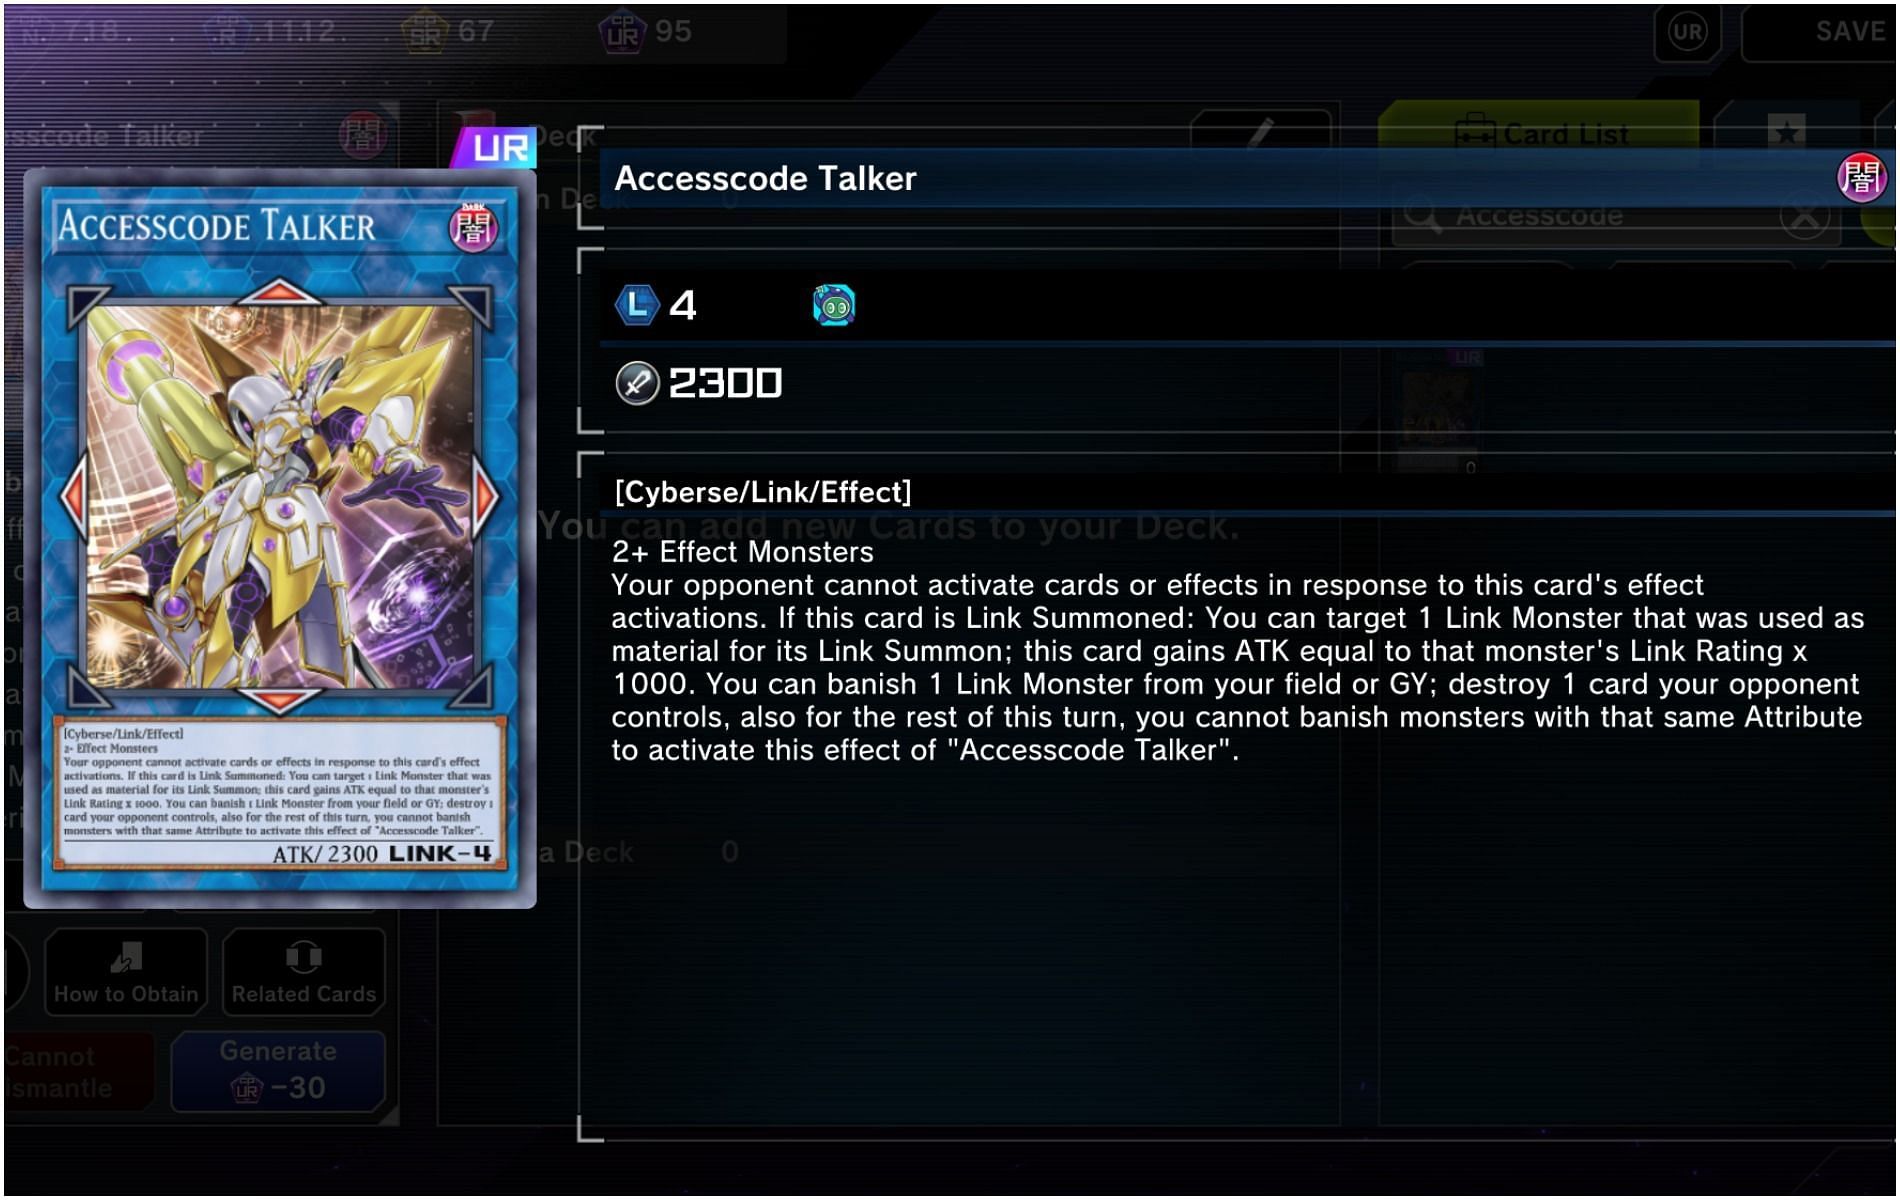 Accesscode Talker and Shuraig seal the deal, and obliterate opponents (Image via Konami)